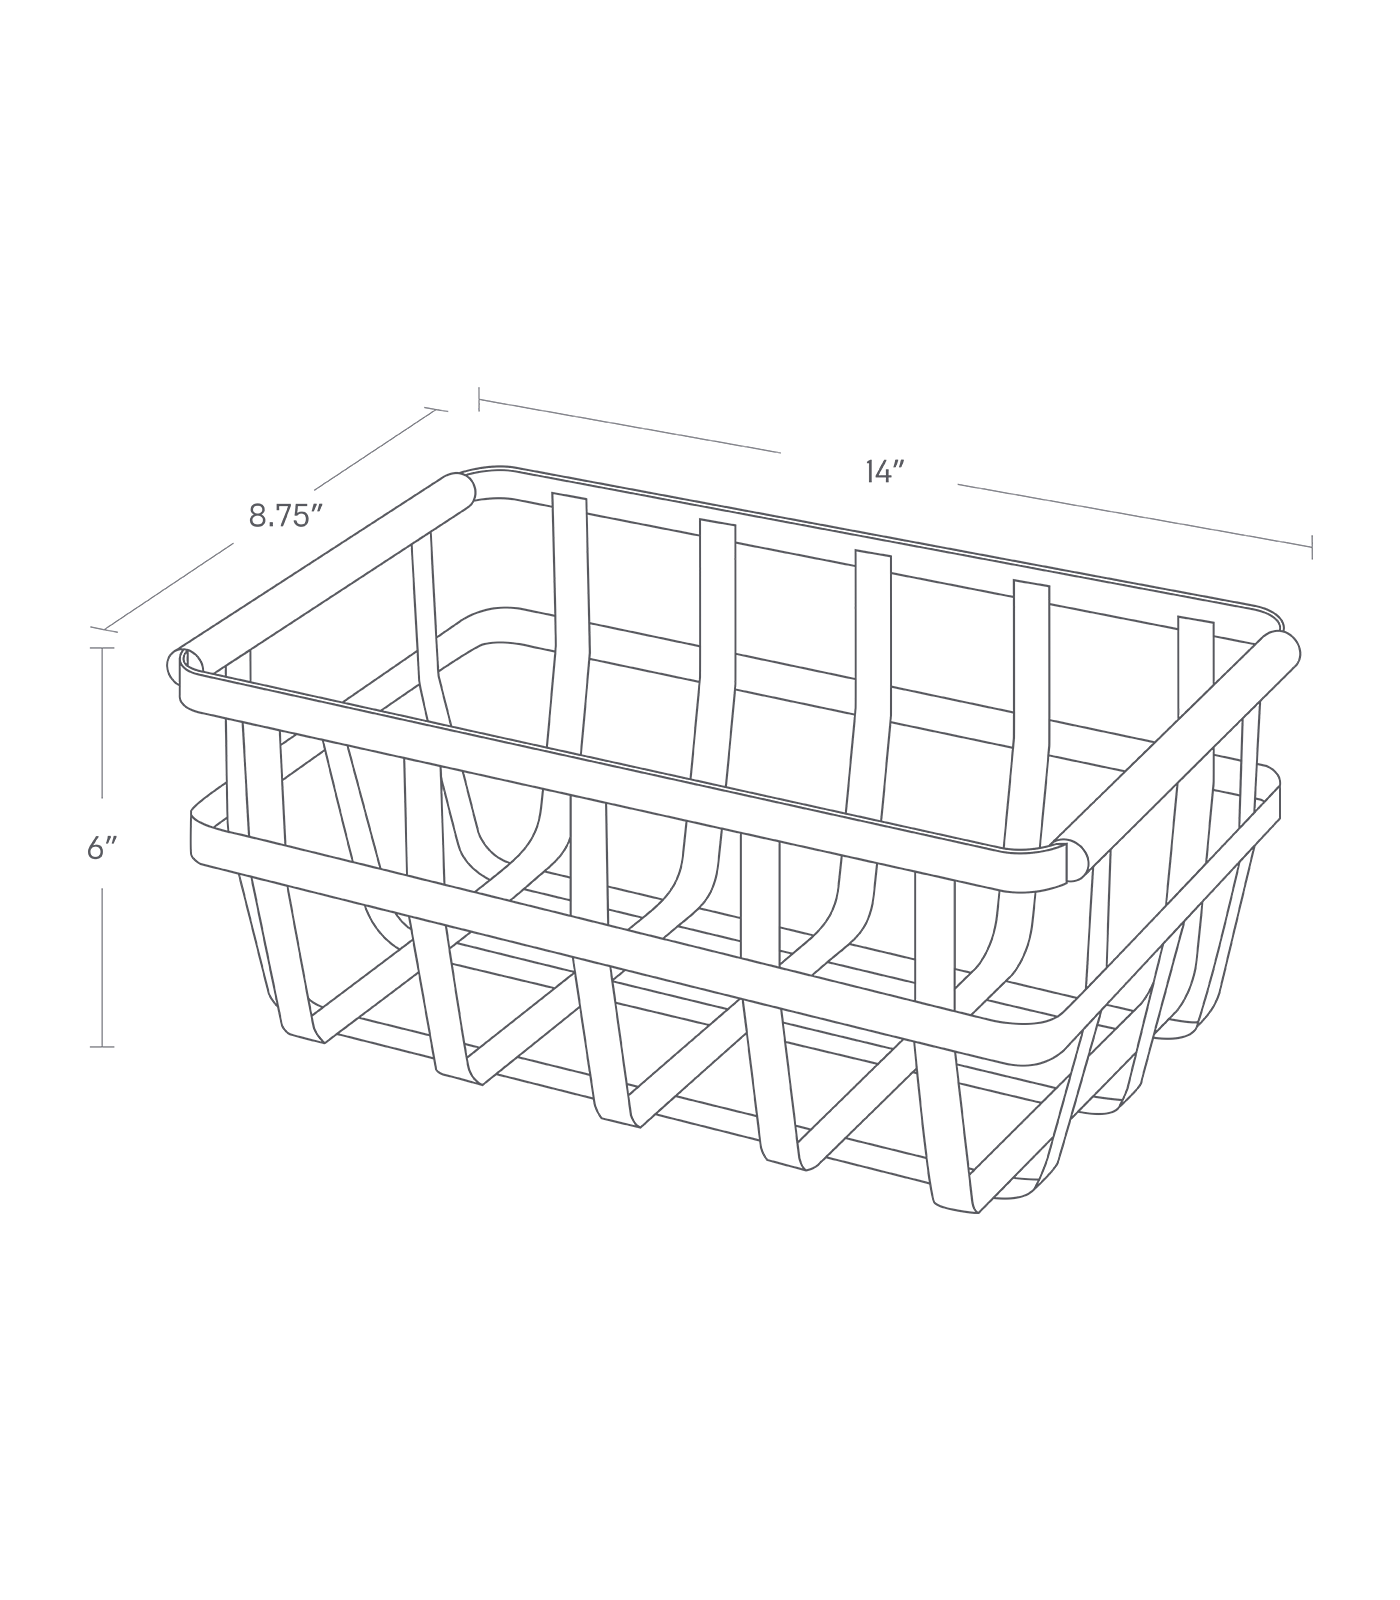 Dimension image for Storage Basket showing height of 6